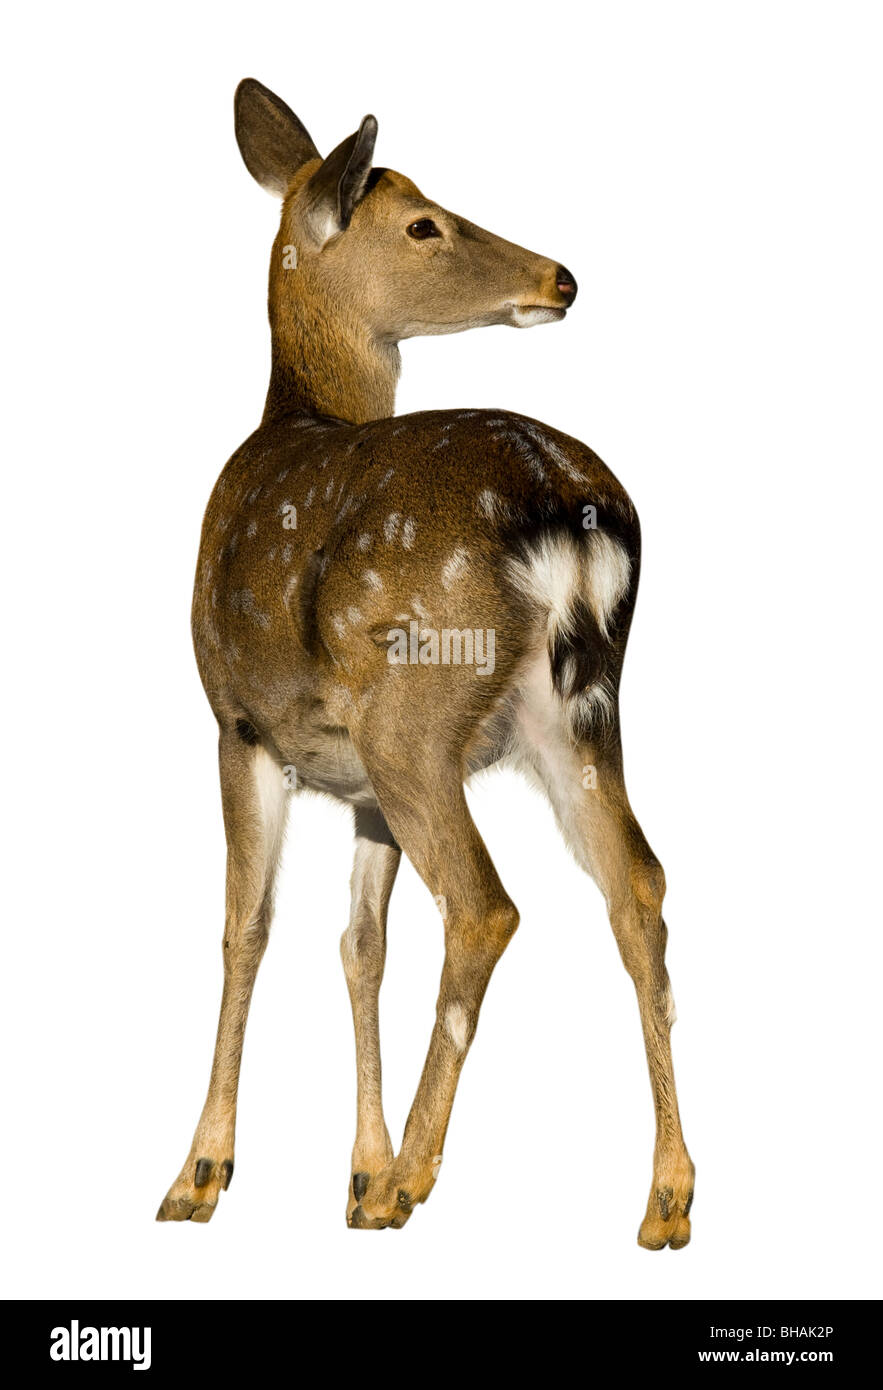 Sika Deer (Cervus nippon) against a white background. Stock Photo